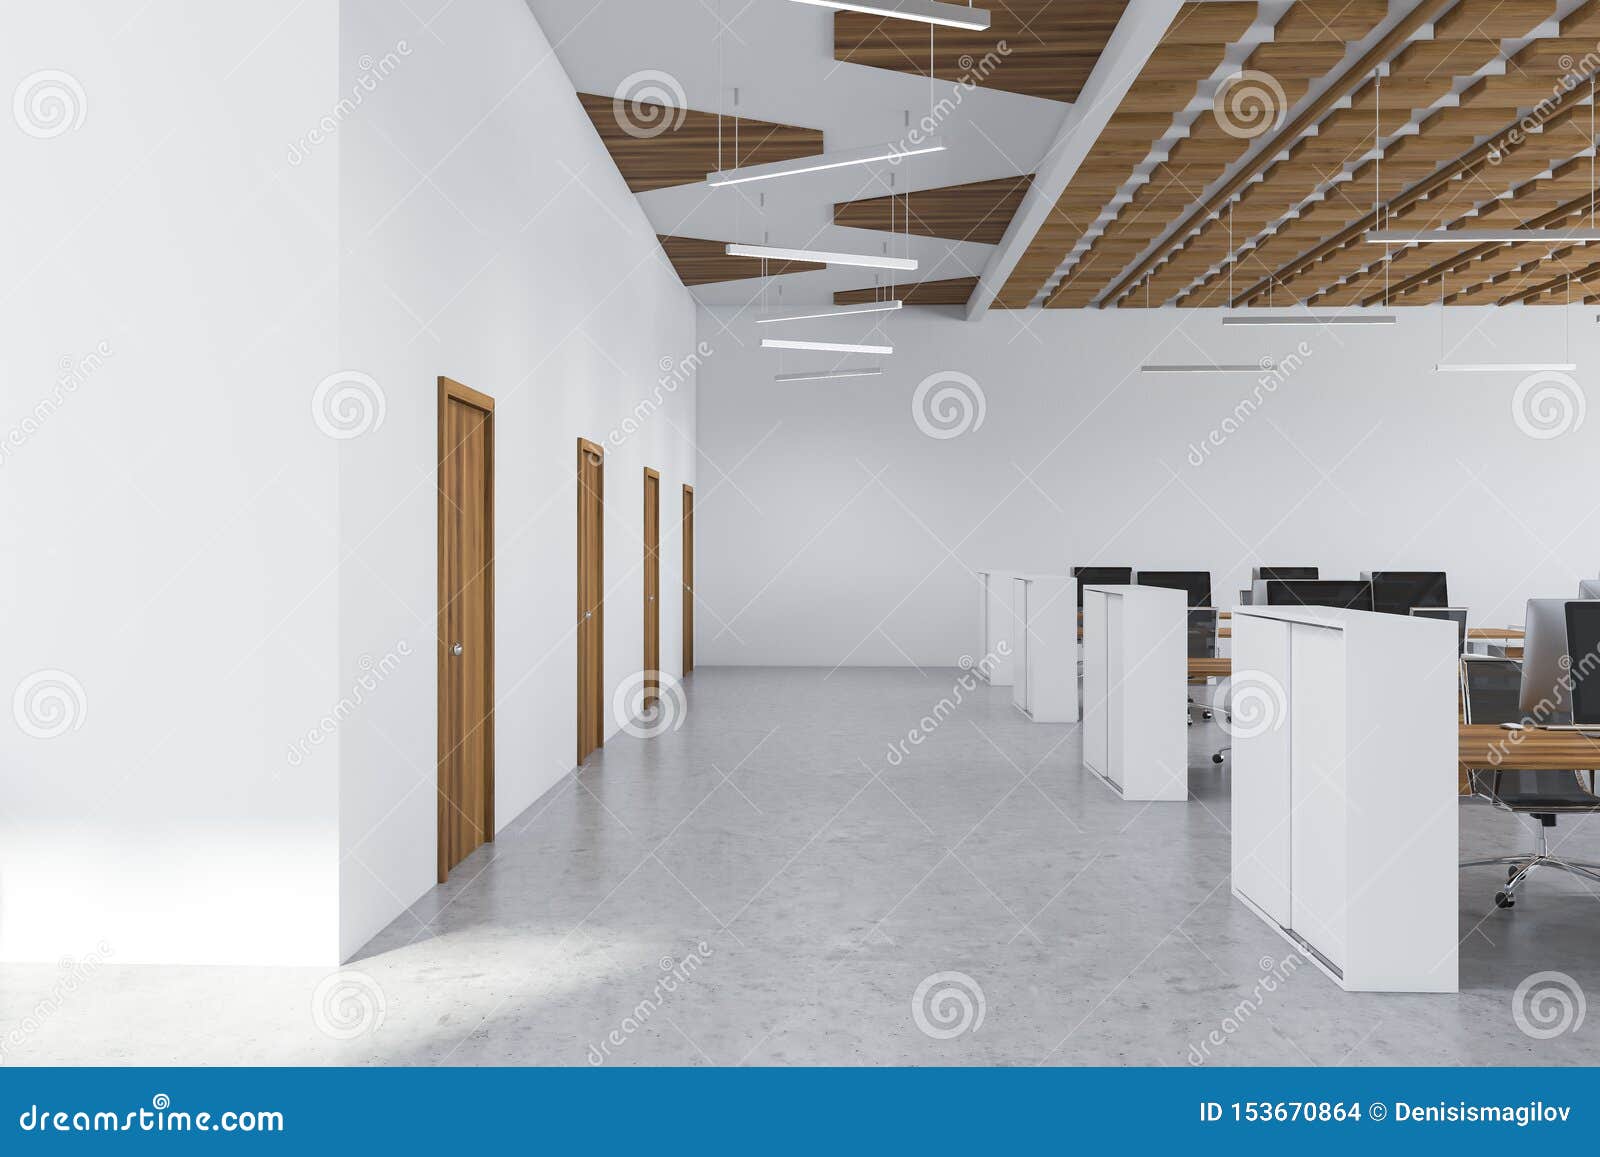 Wood Ceiling Open Space Office With Doors Stock Illustration